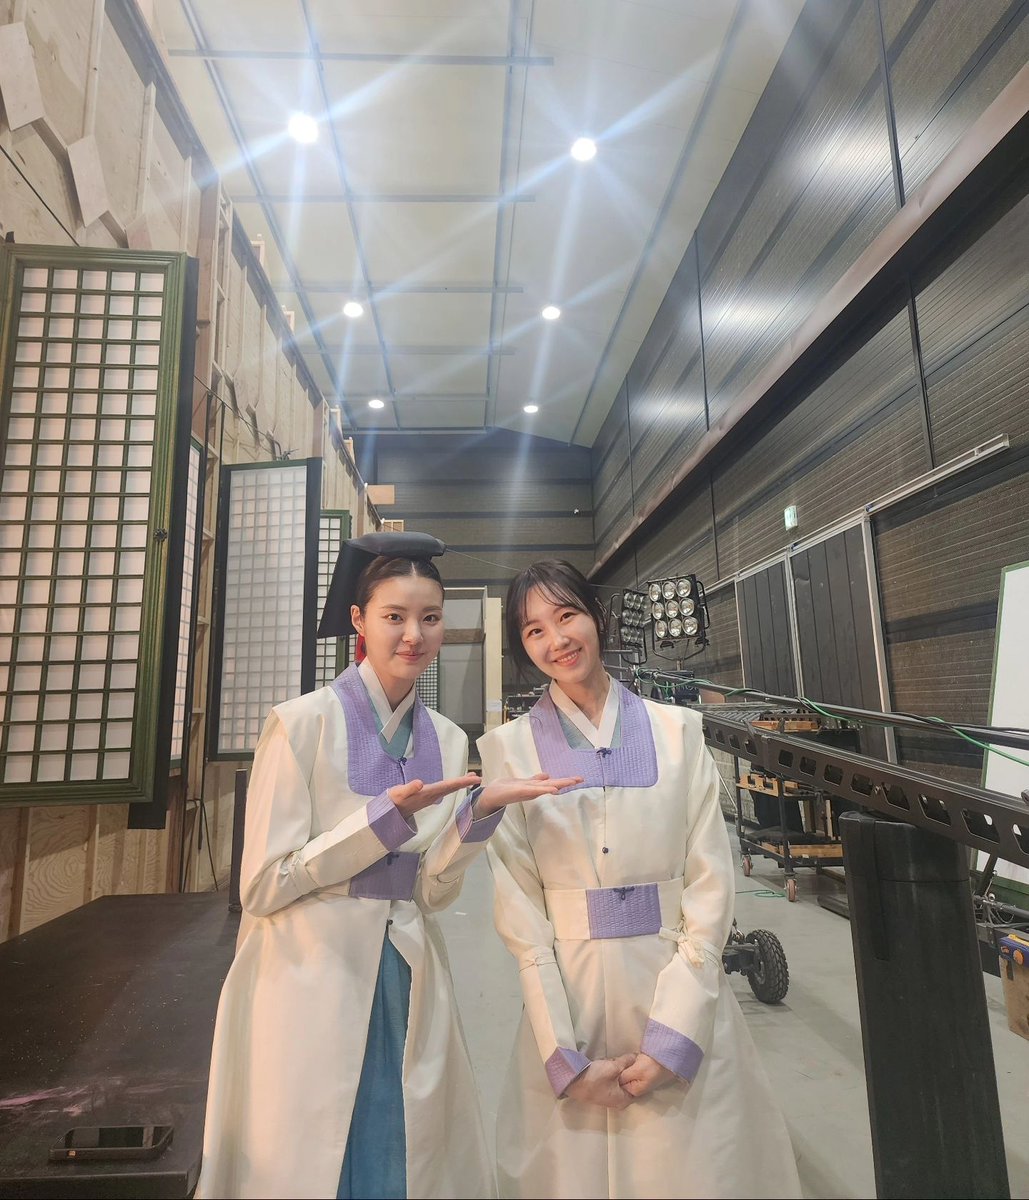 [240429] miinvly instagram updage with Hong Yeji

'Double Role
Myeongyoon ꈍᴗꈍ
You made me the main character of the photo.
With the pretty and kind actress Yeji 🌷🩷'

#HongYeji #홍예지 #세자가사라졌다 #MissingCrownPrince